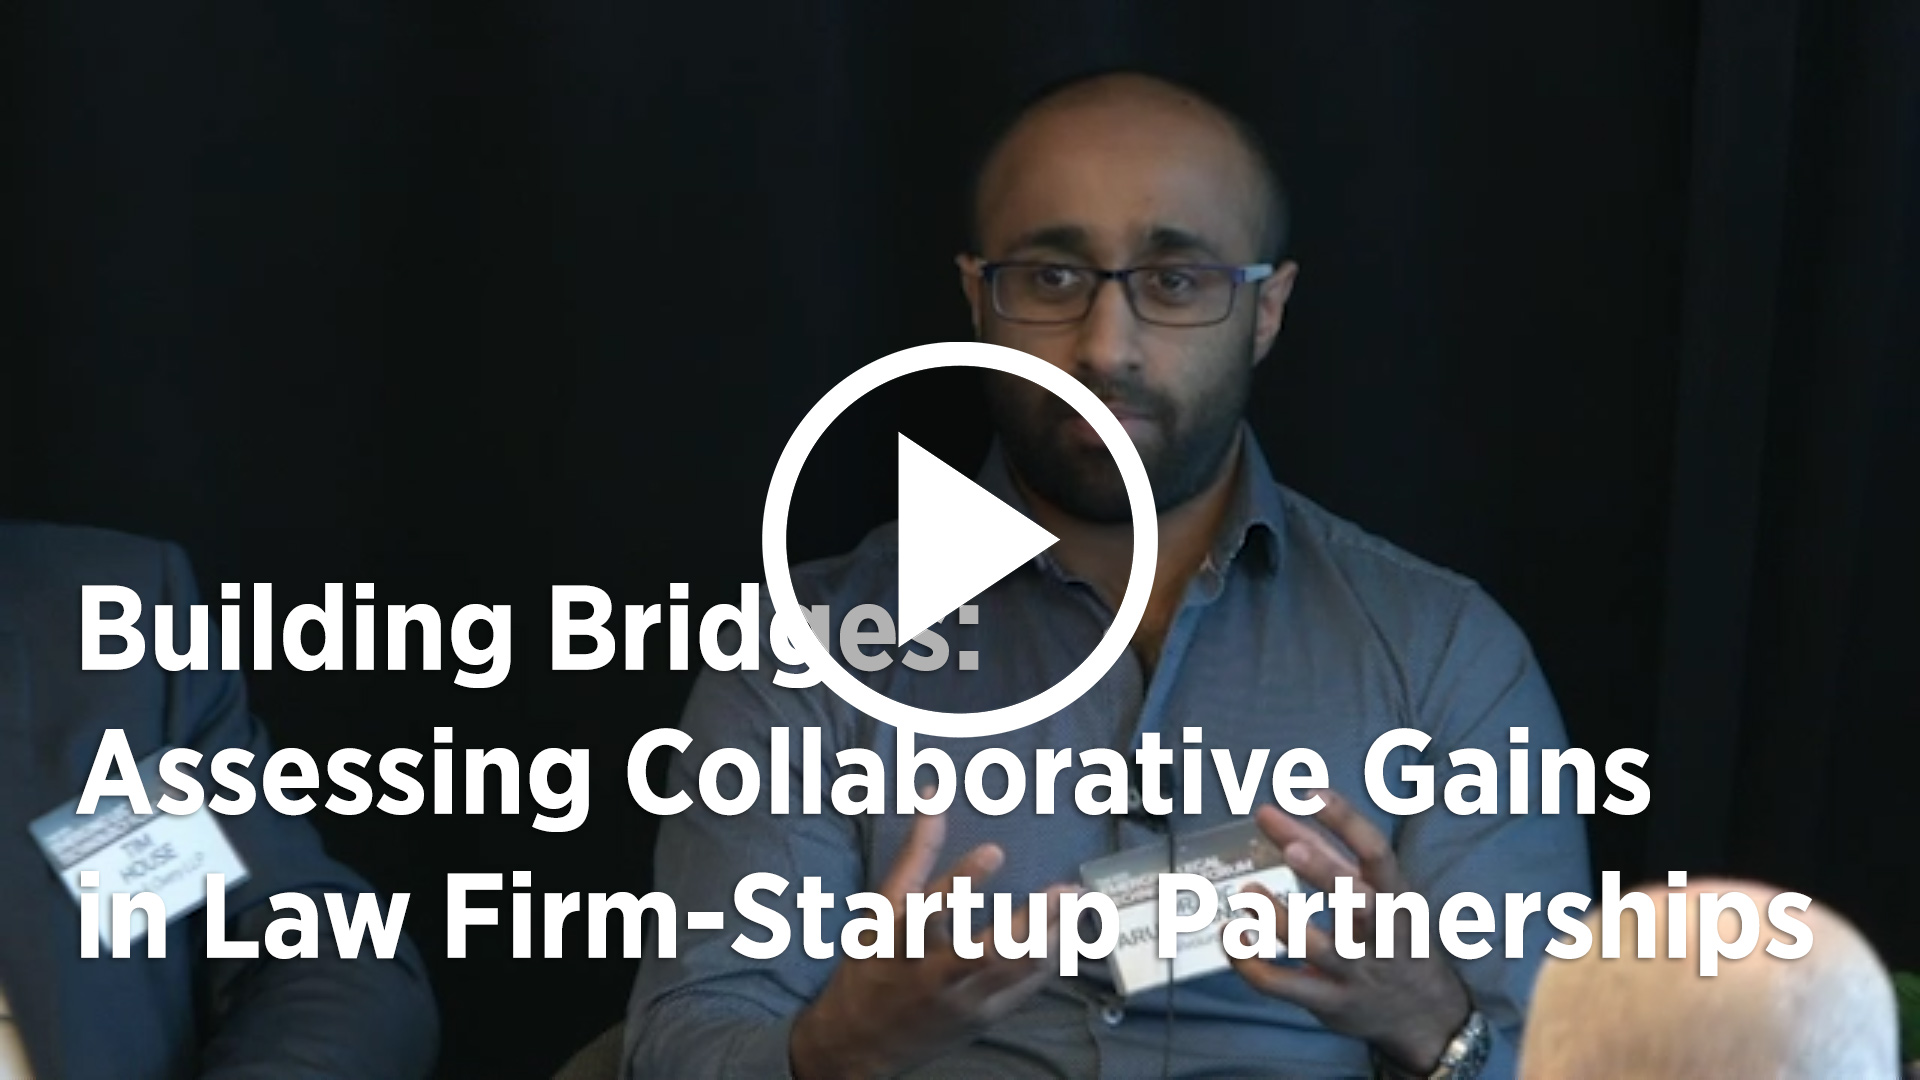 Building Bridges: Assessing Collaborative Gains in Law Firm-Startup Partnerships